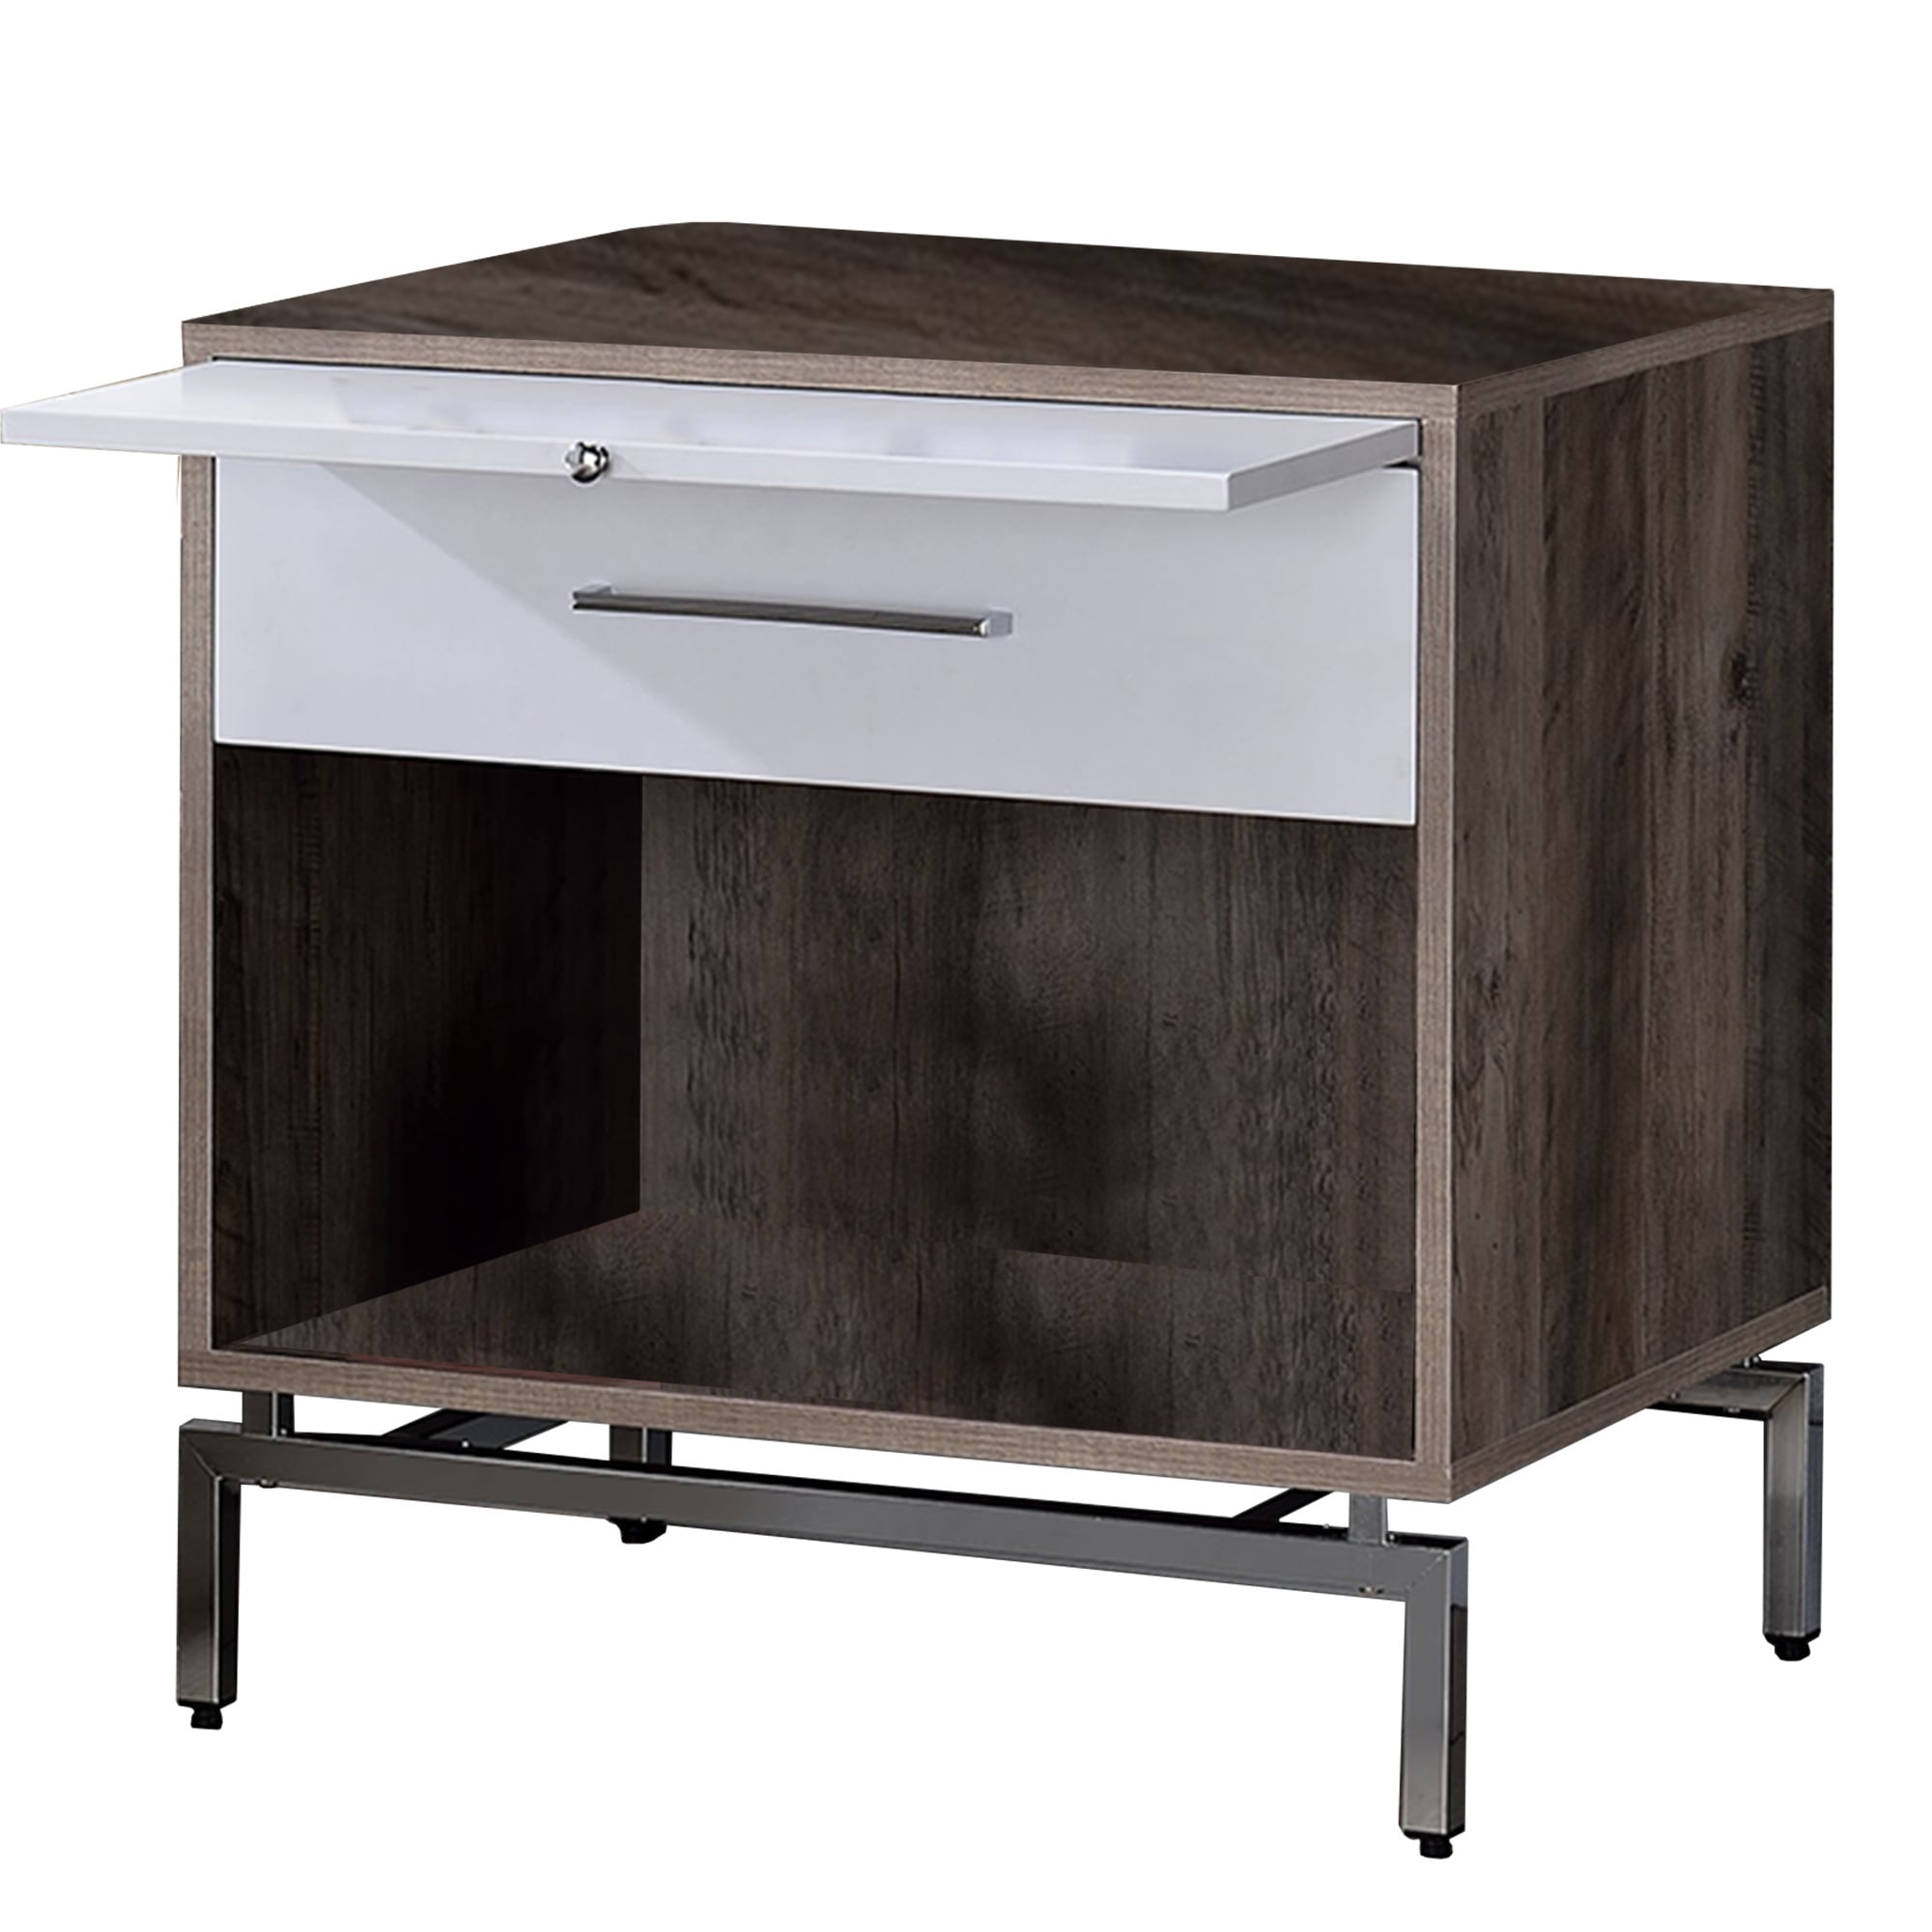 Bm209611 24 X 16 X 24 In. Wooden Accent Table With Open Storage & Pull Out Tray, Brown & White